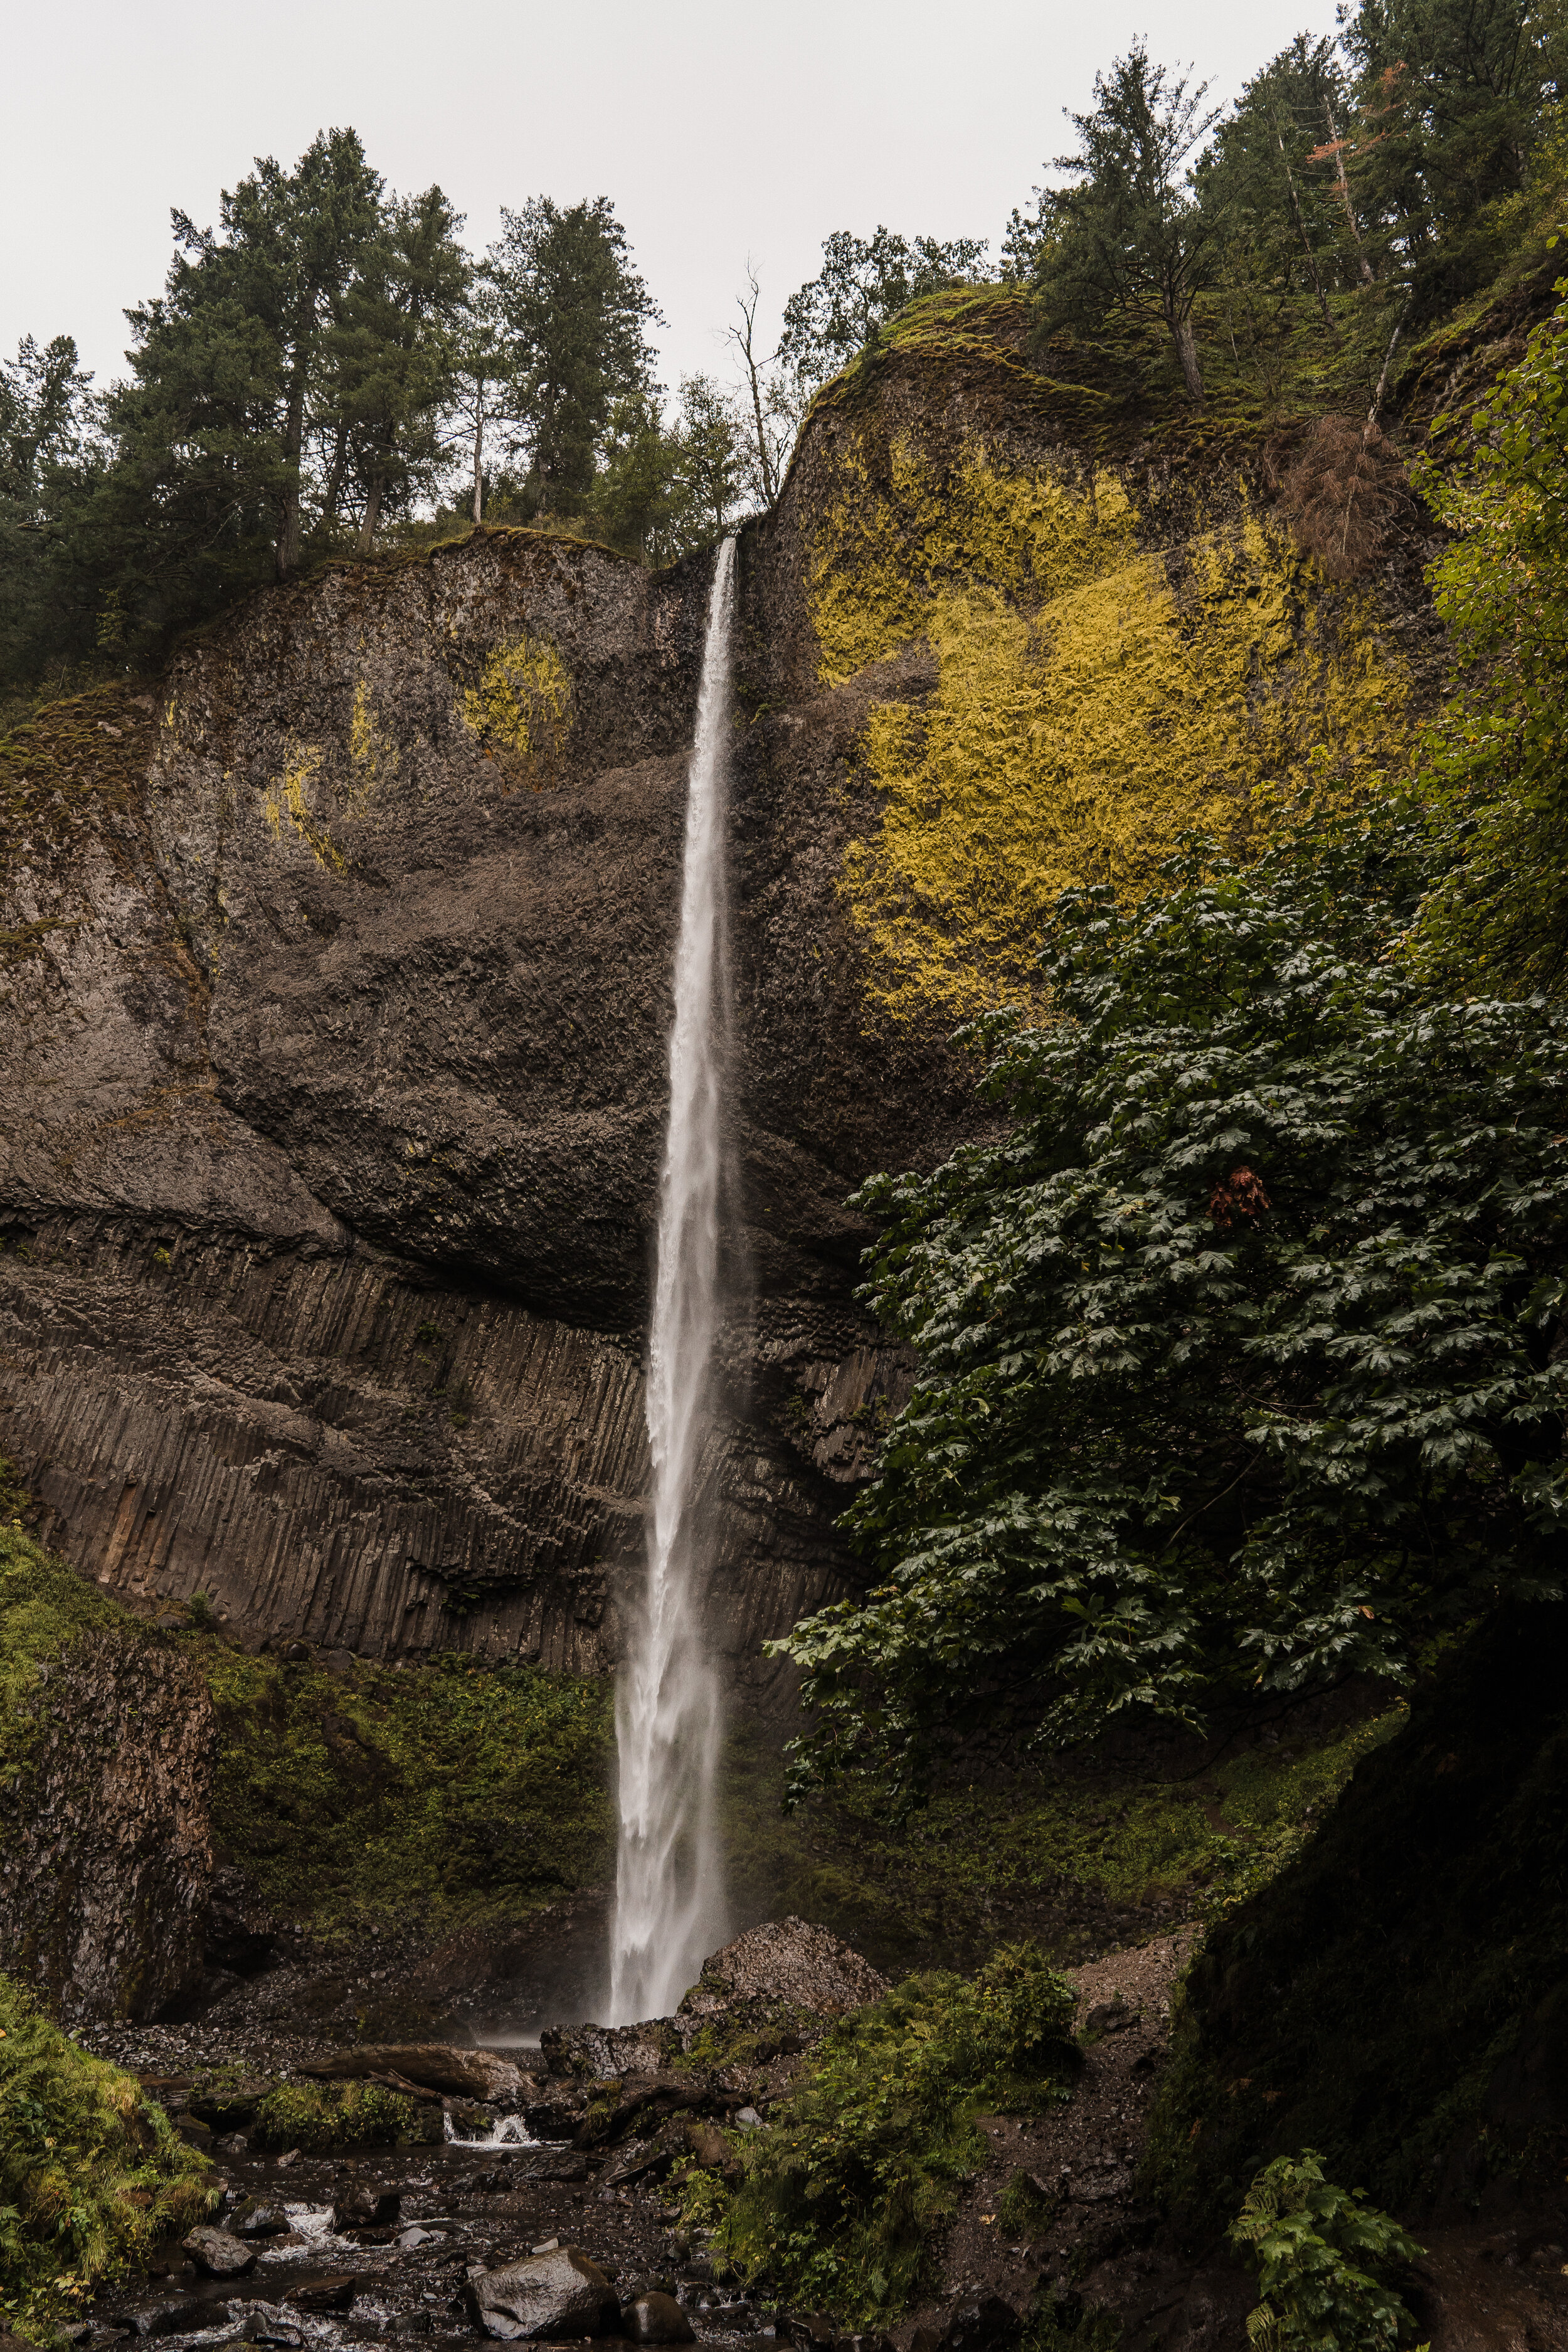 Columbia River Gorge: Elopement Style Vow Renewal | Between the Pine Adventure Elopement Photography